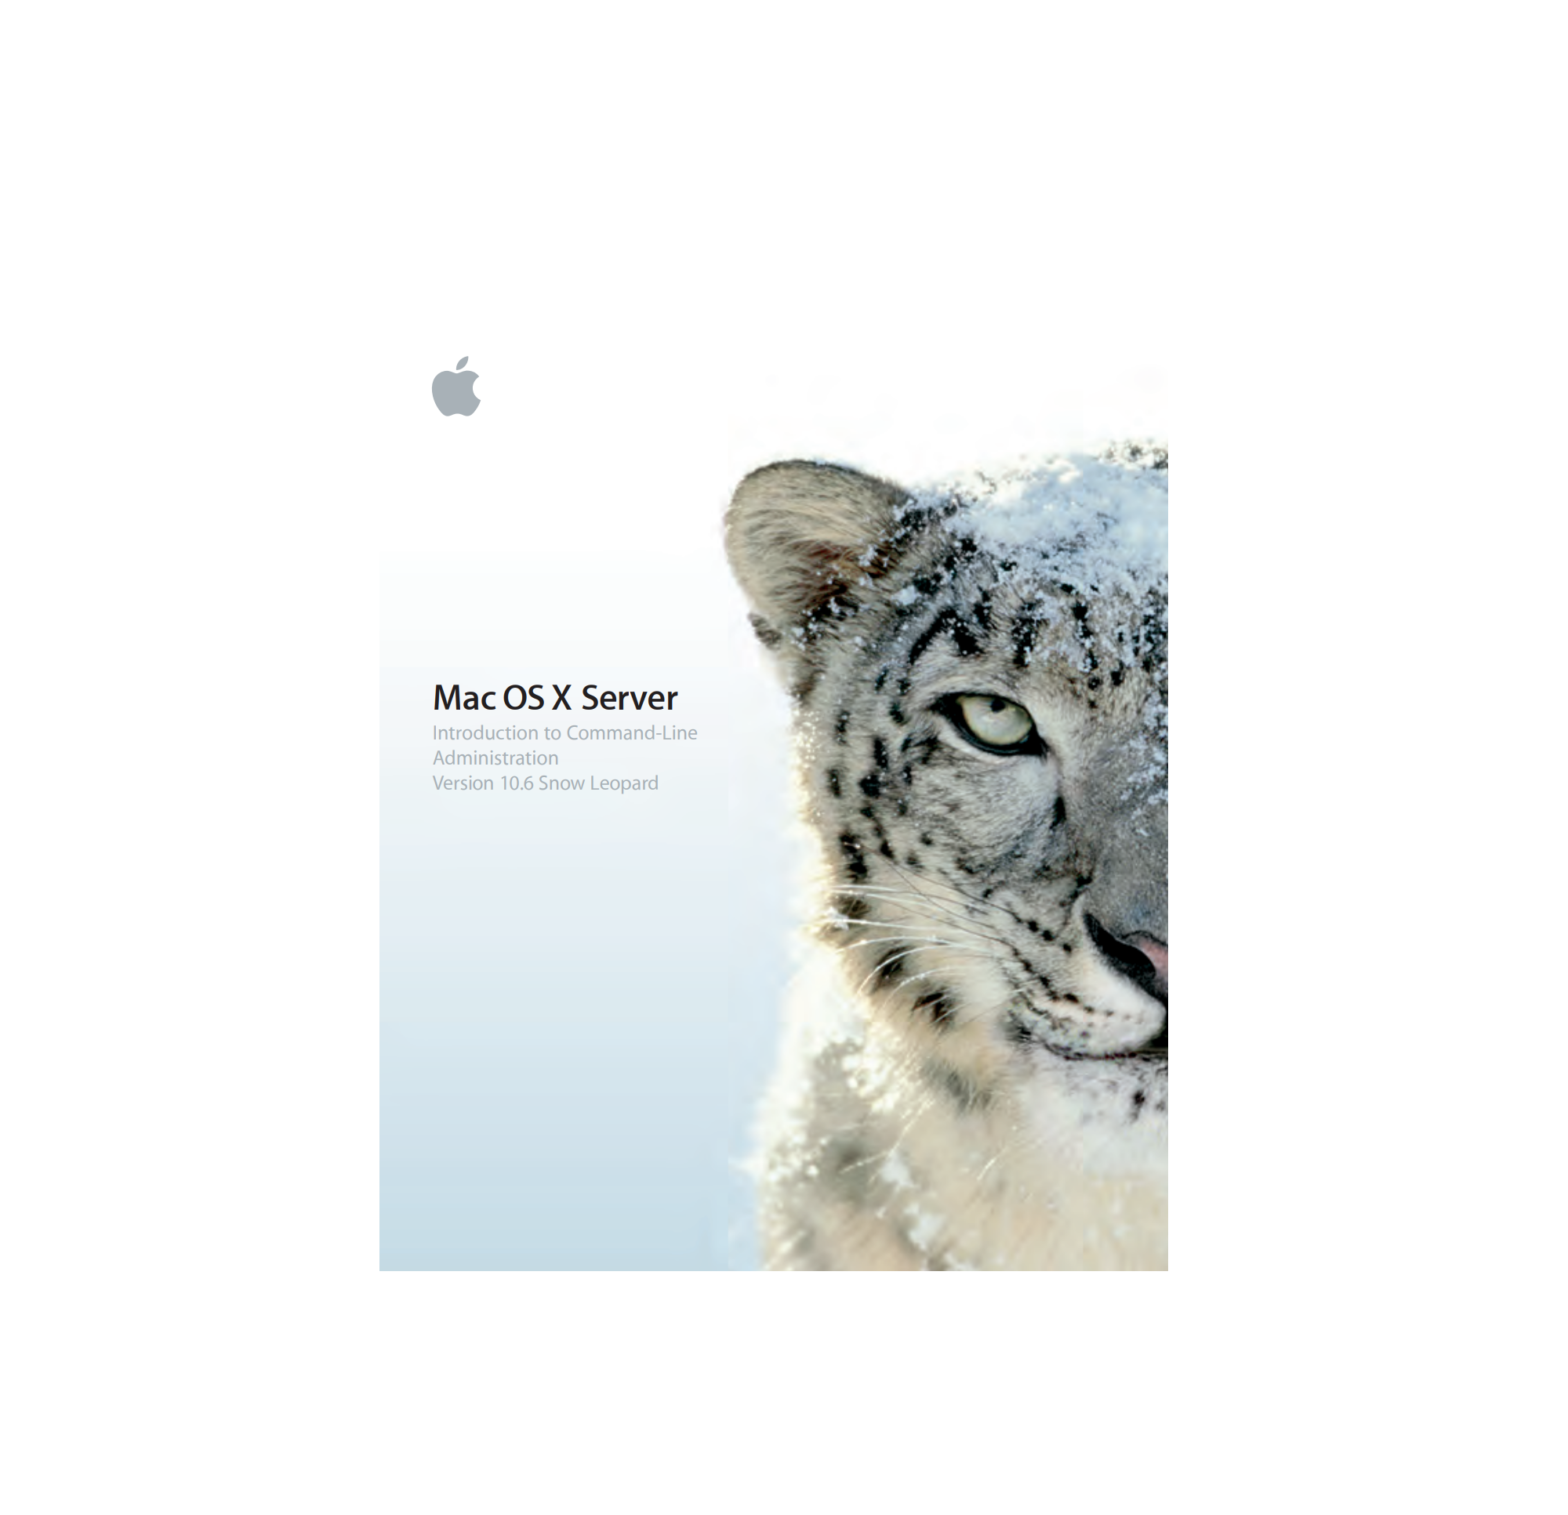 Apple Mac OS X Server Introduction to Command-Line Administration Version 10.6 Snow Leopard